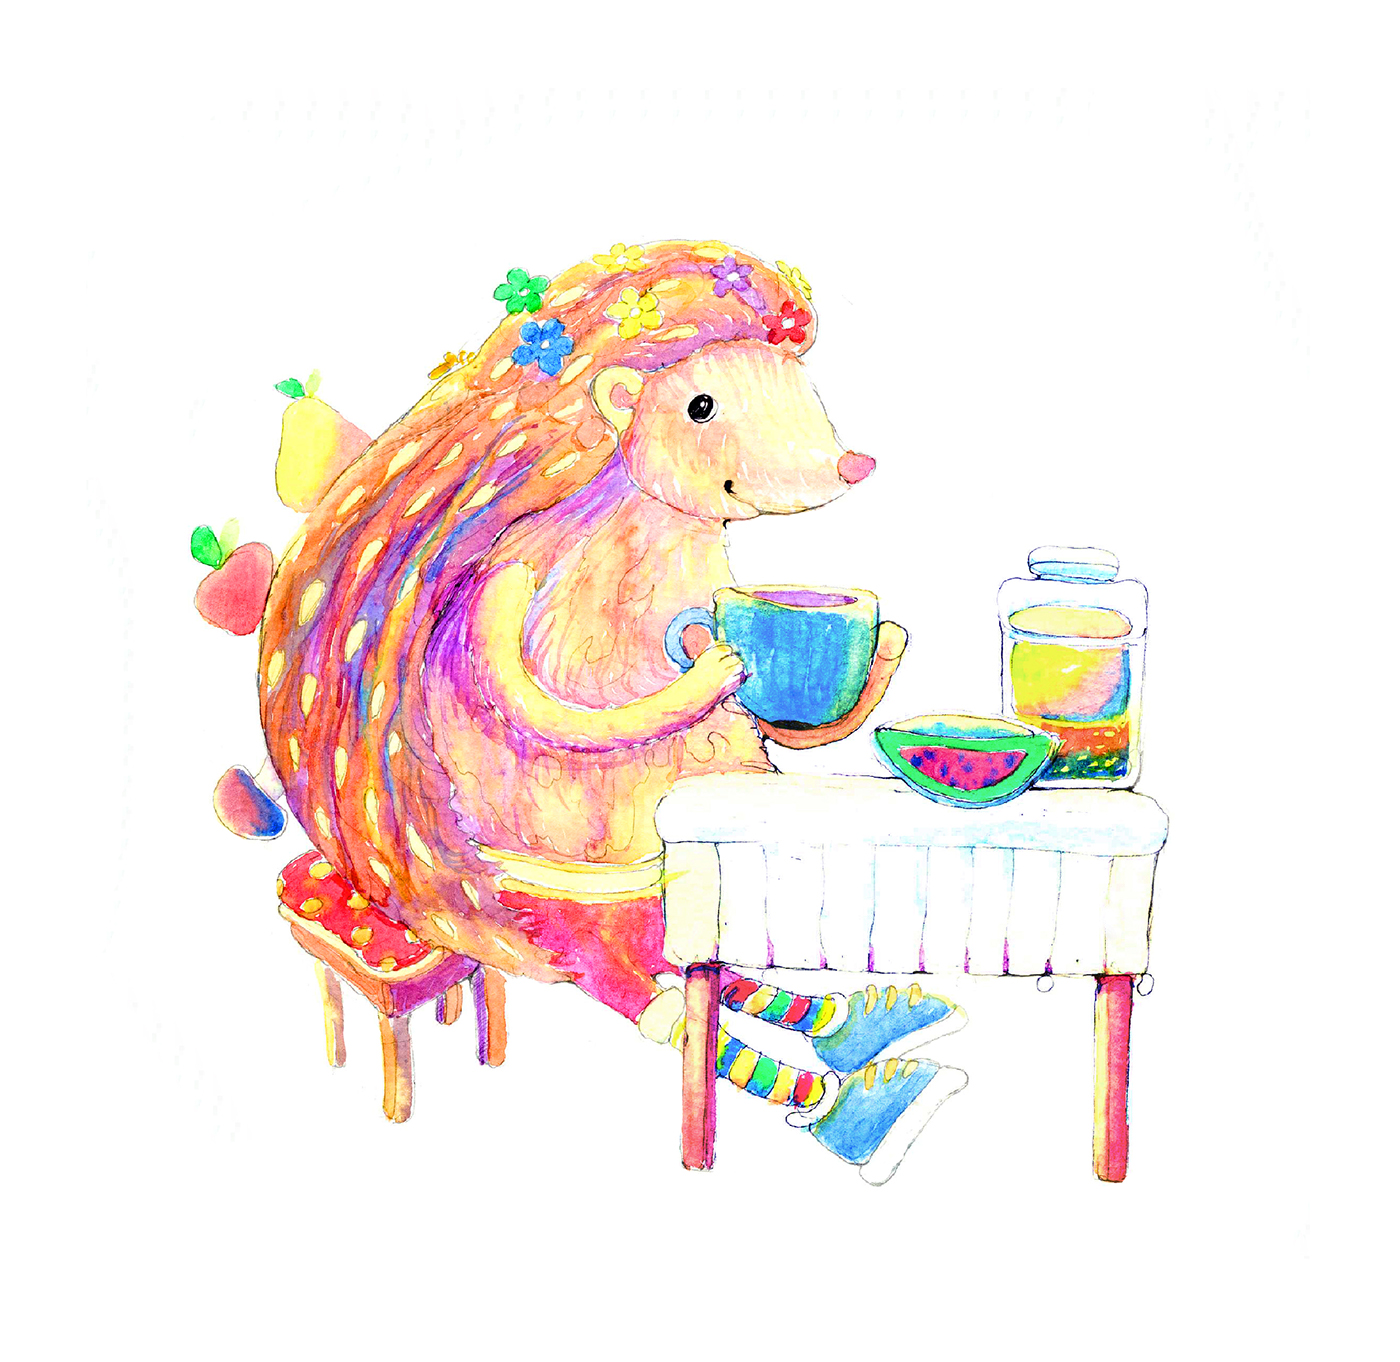 watercolor children book Picture book animal illustration animal colorful whimsical book illustration painting   Character design 